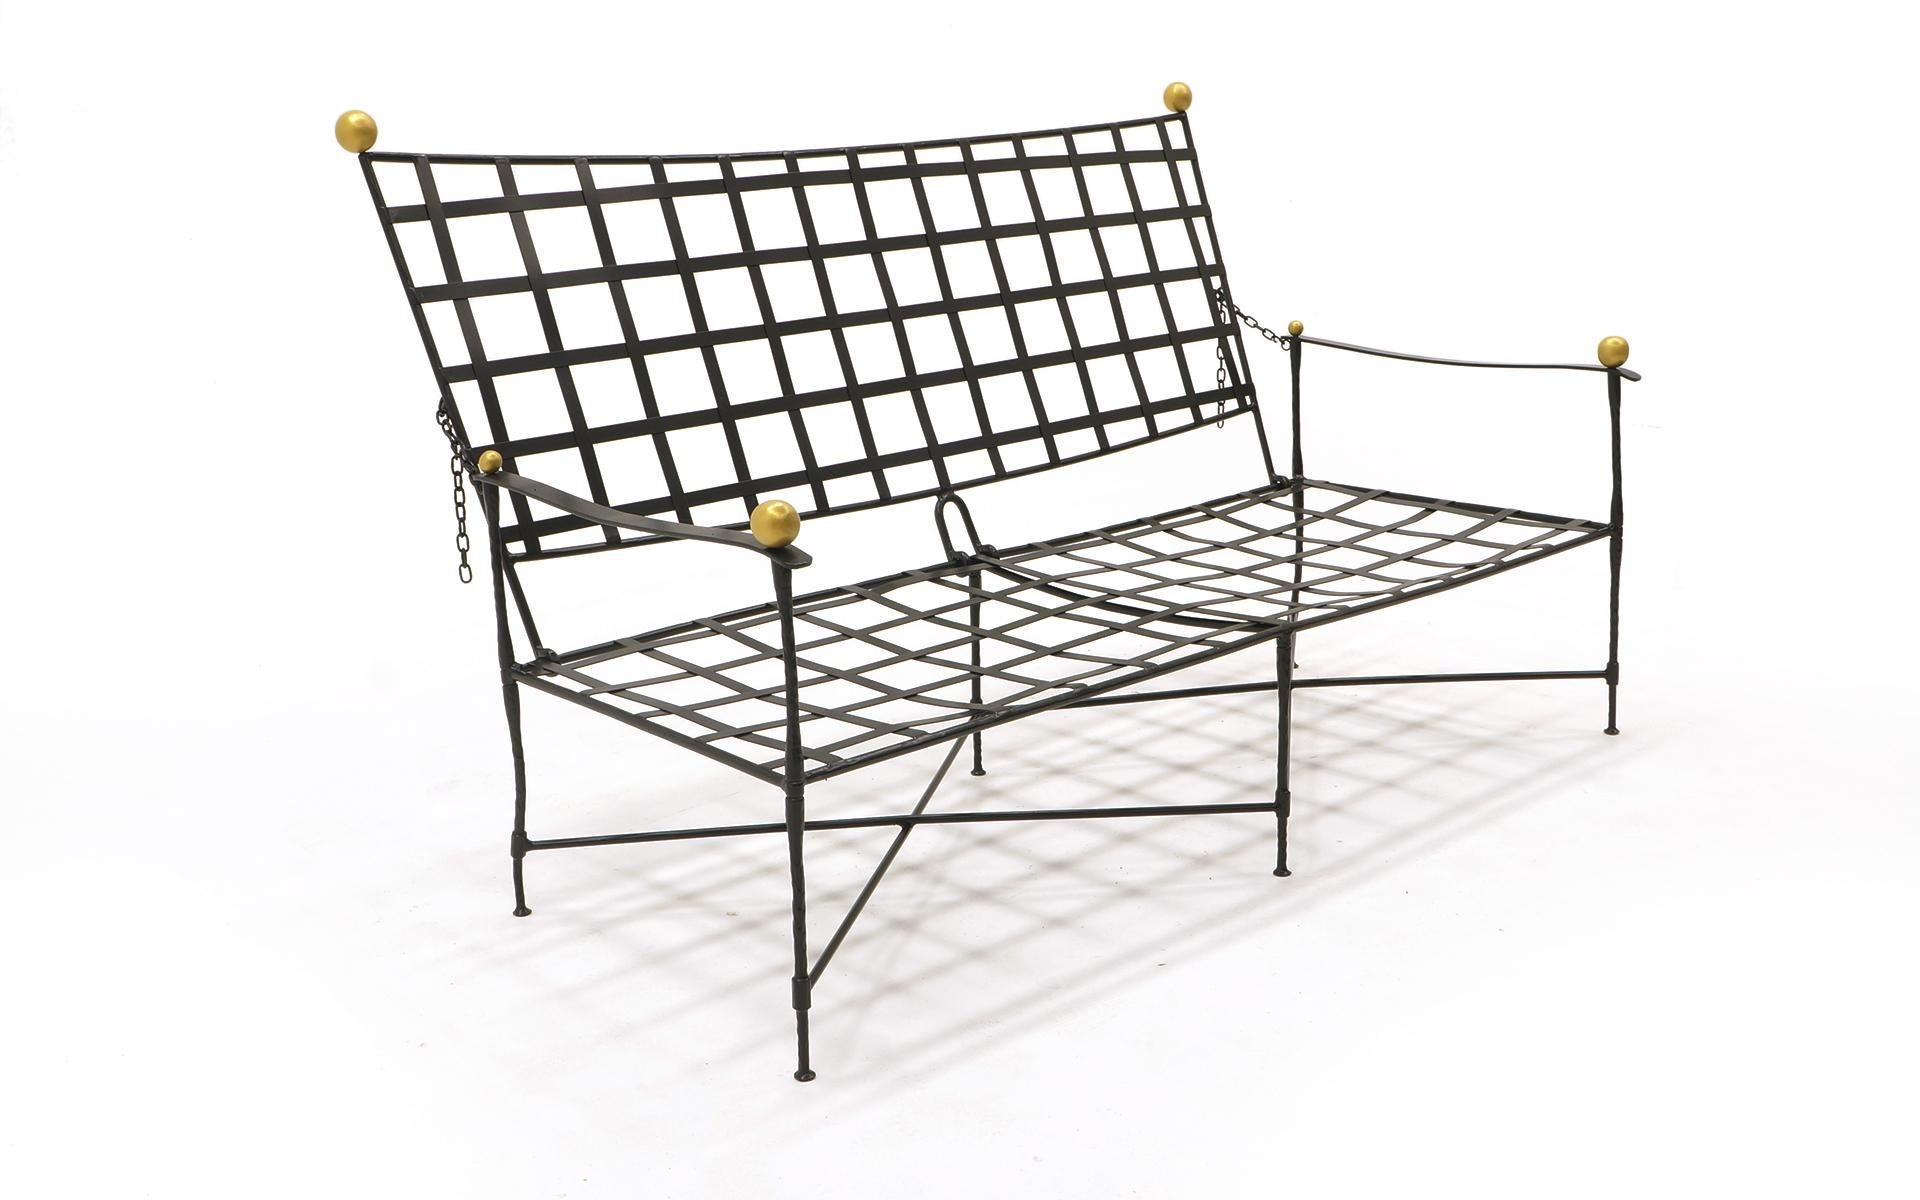 Patio love seat / loveseat designed by Mario Papperzini for the John Salterini Company, 1950s. We have the companion coffee table and chair with ottoman in our other listings. All have been professionally media blasted and powder coated in a satin